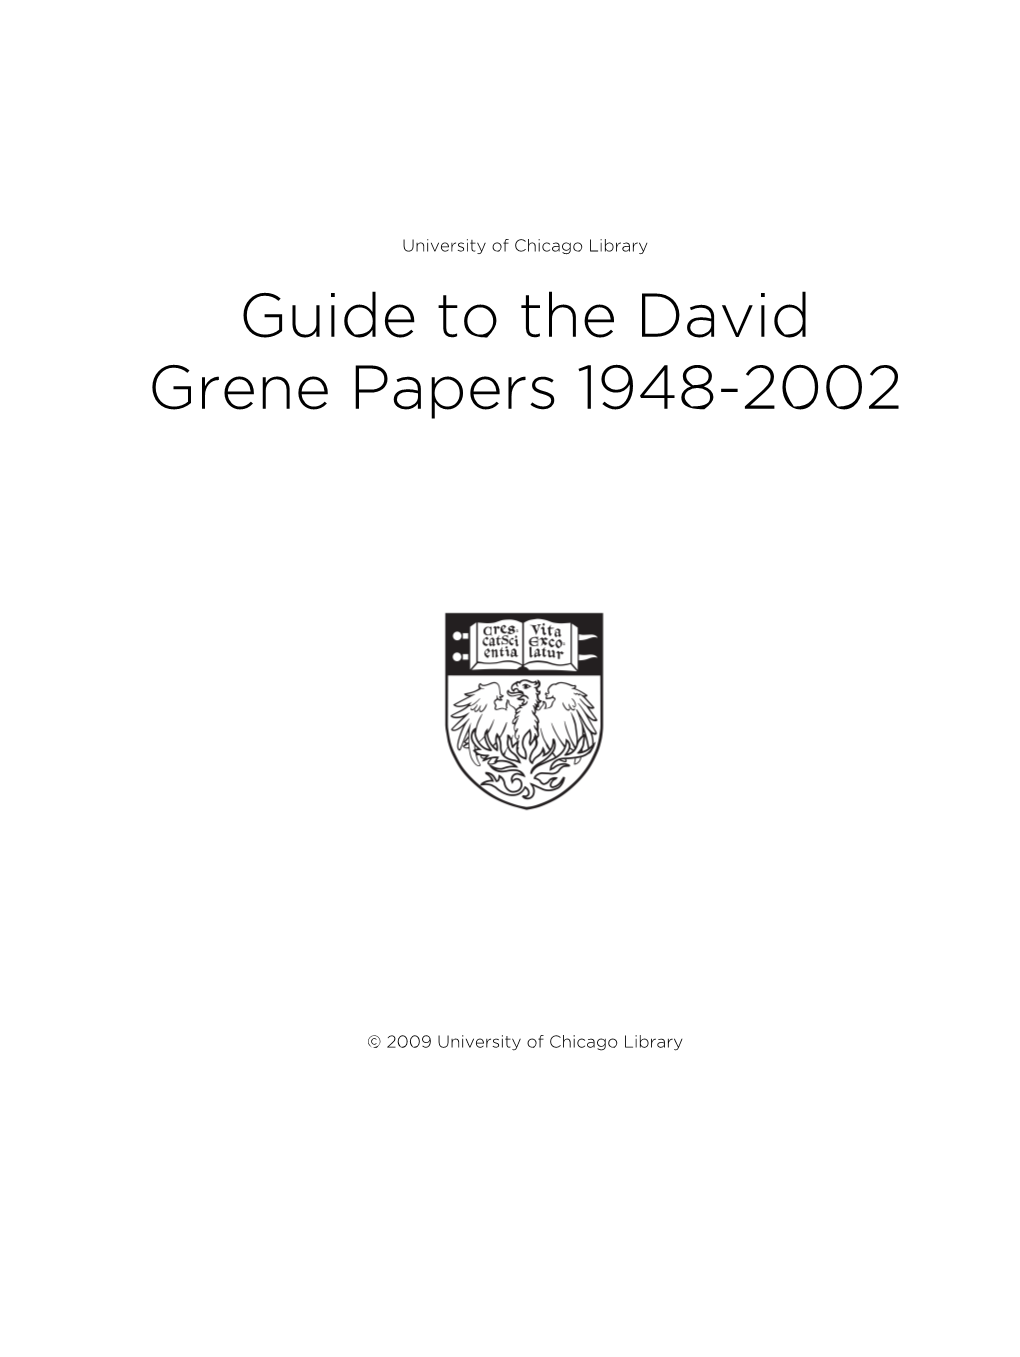 Guide to the David Grene Papers 1948-2002